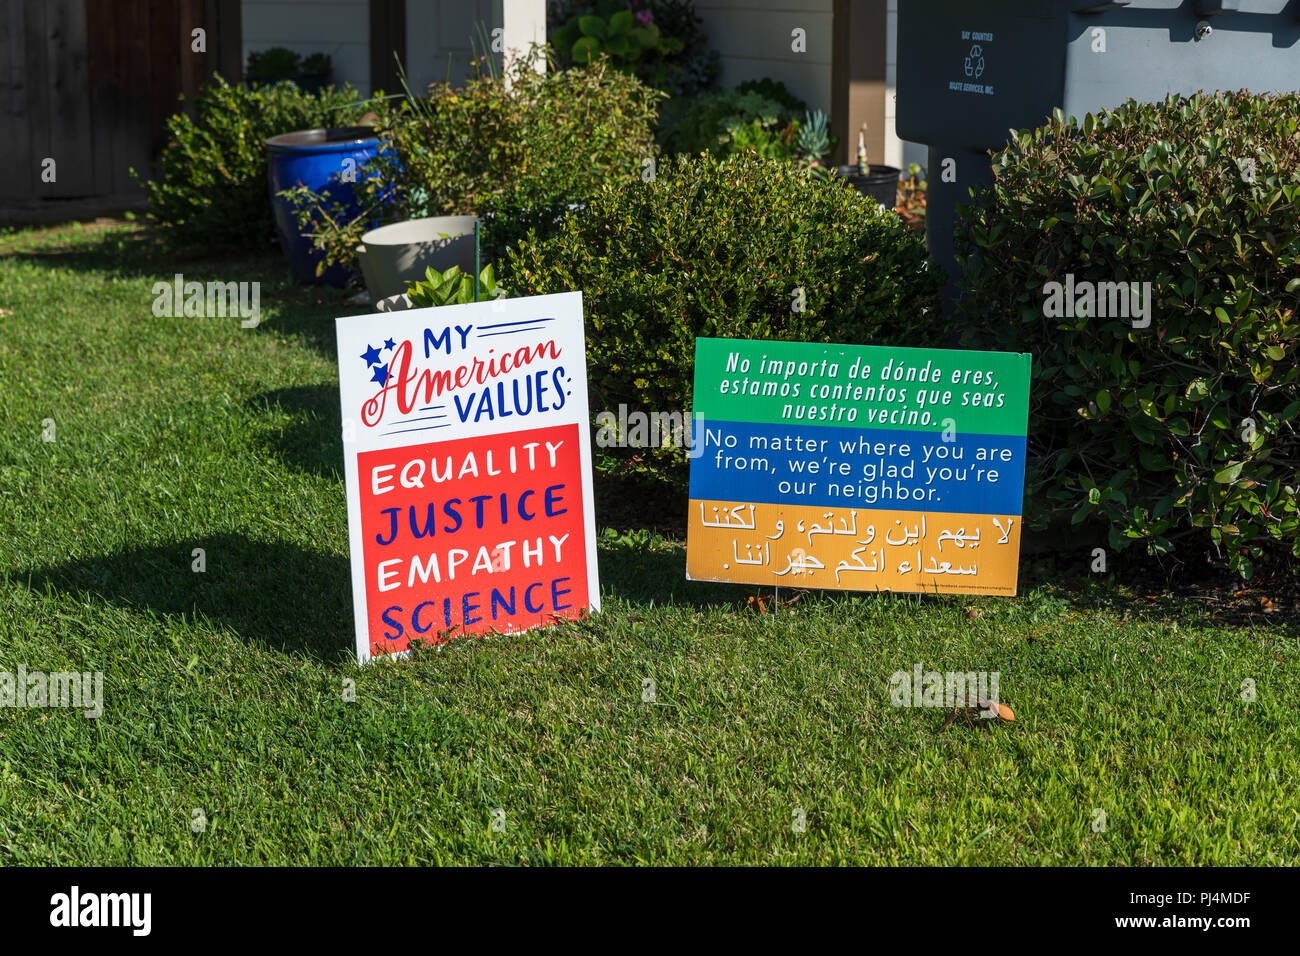 My American Values: Equality, Justice, Empathy, Science; signs outside house in Sunnyvale, California Stock Photo